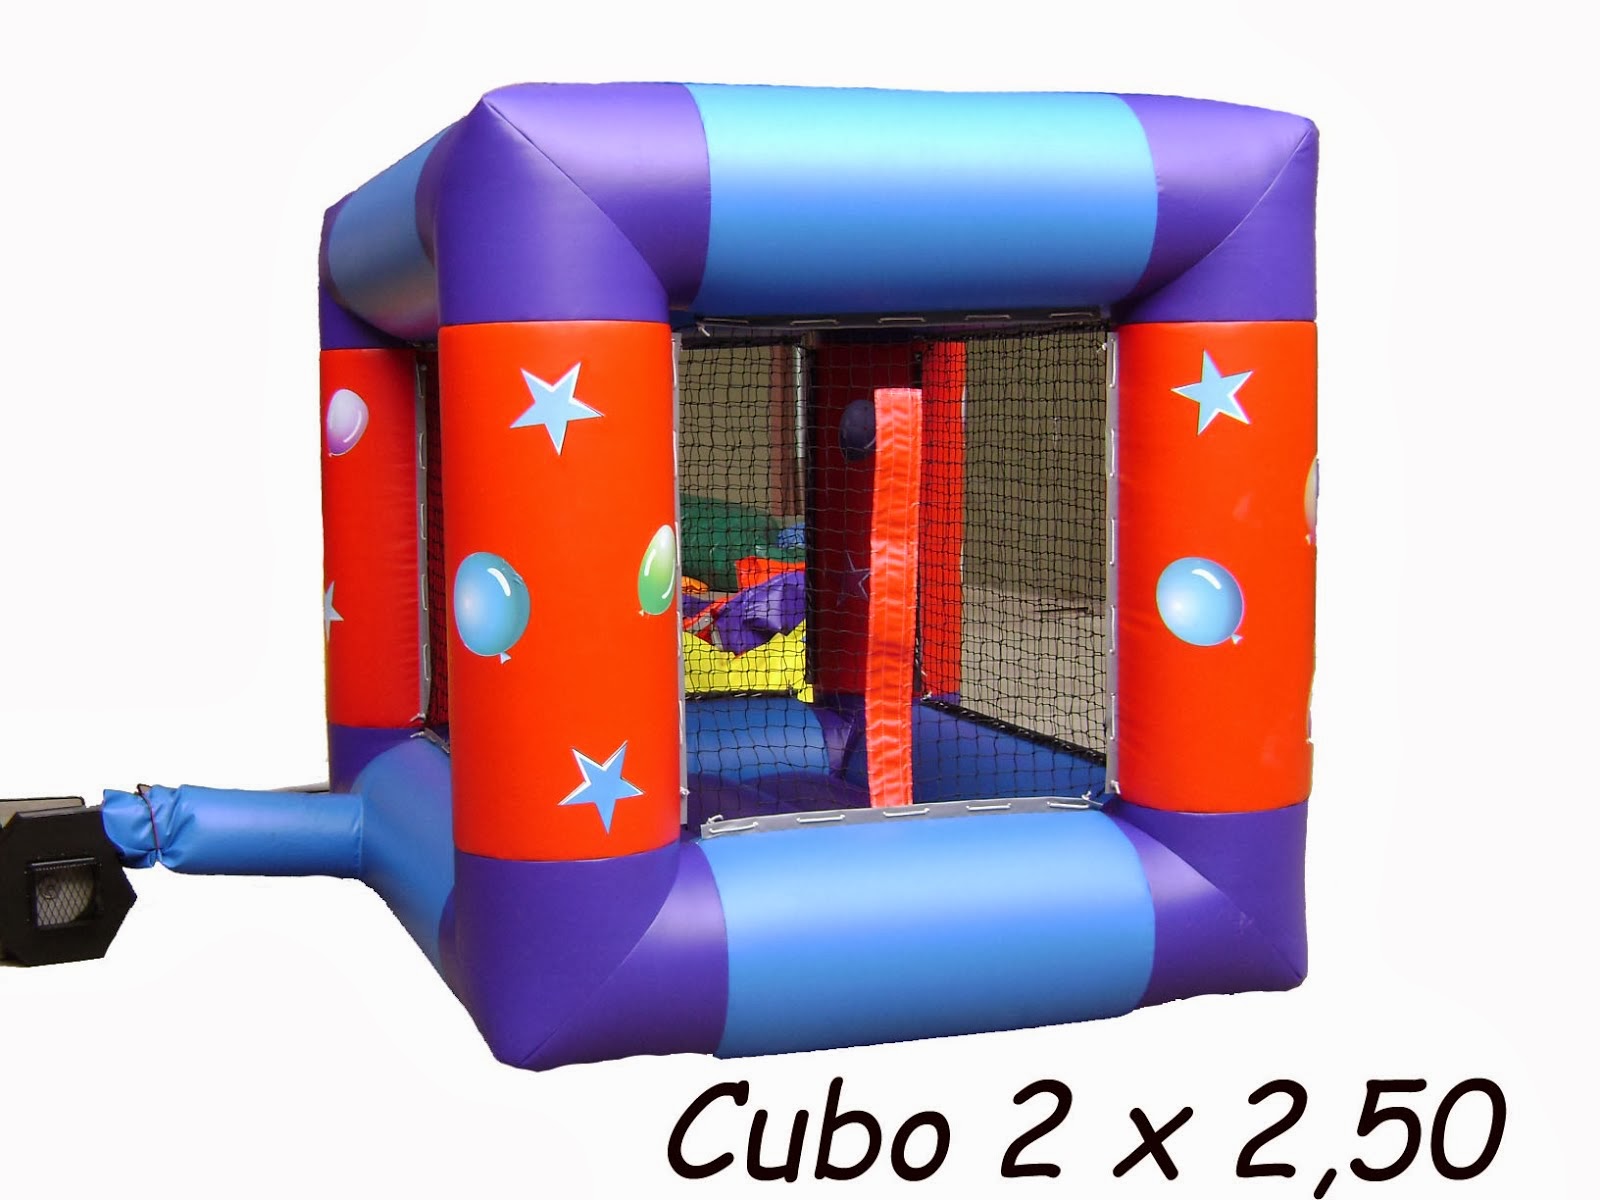 INFLABLE CUBO PELOTERO 2 x 2,50